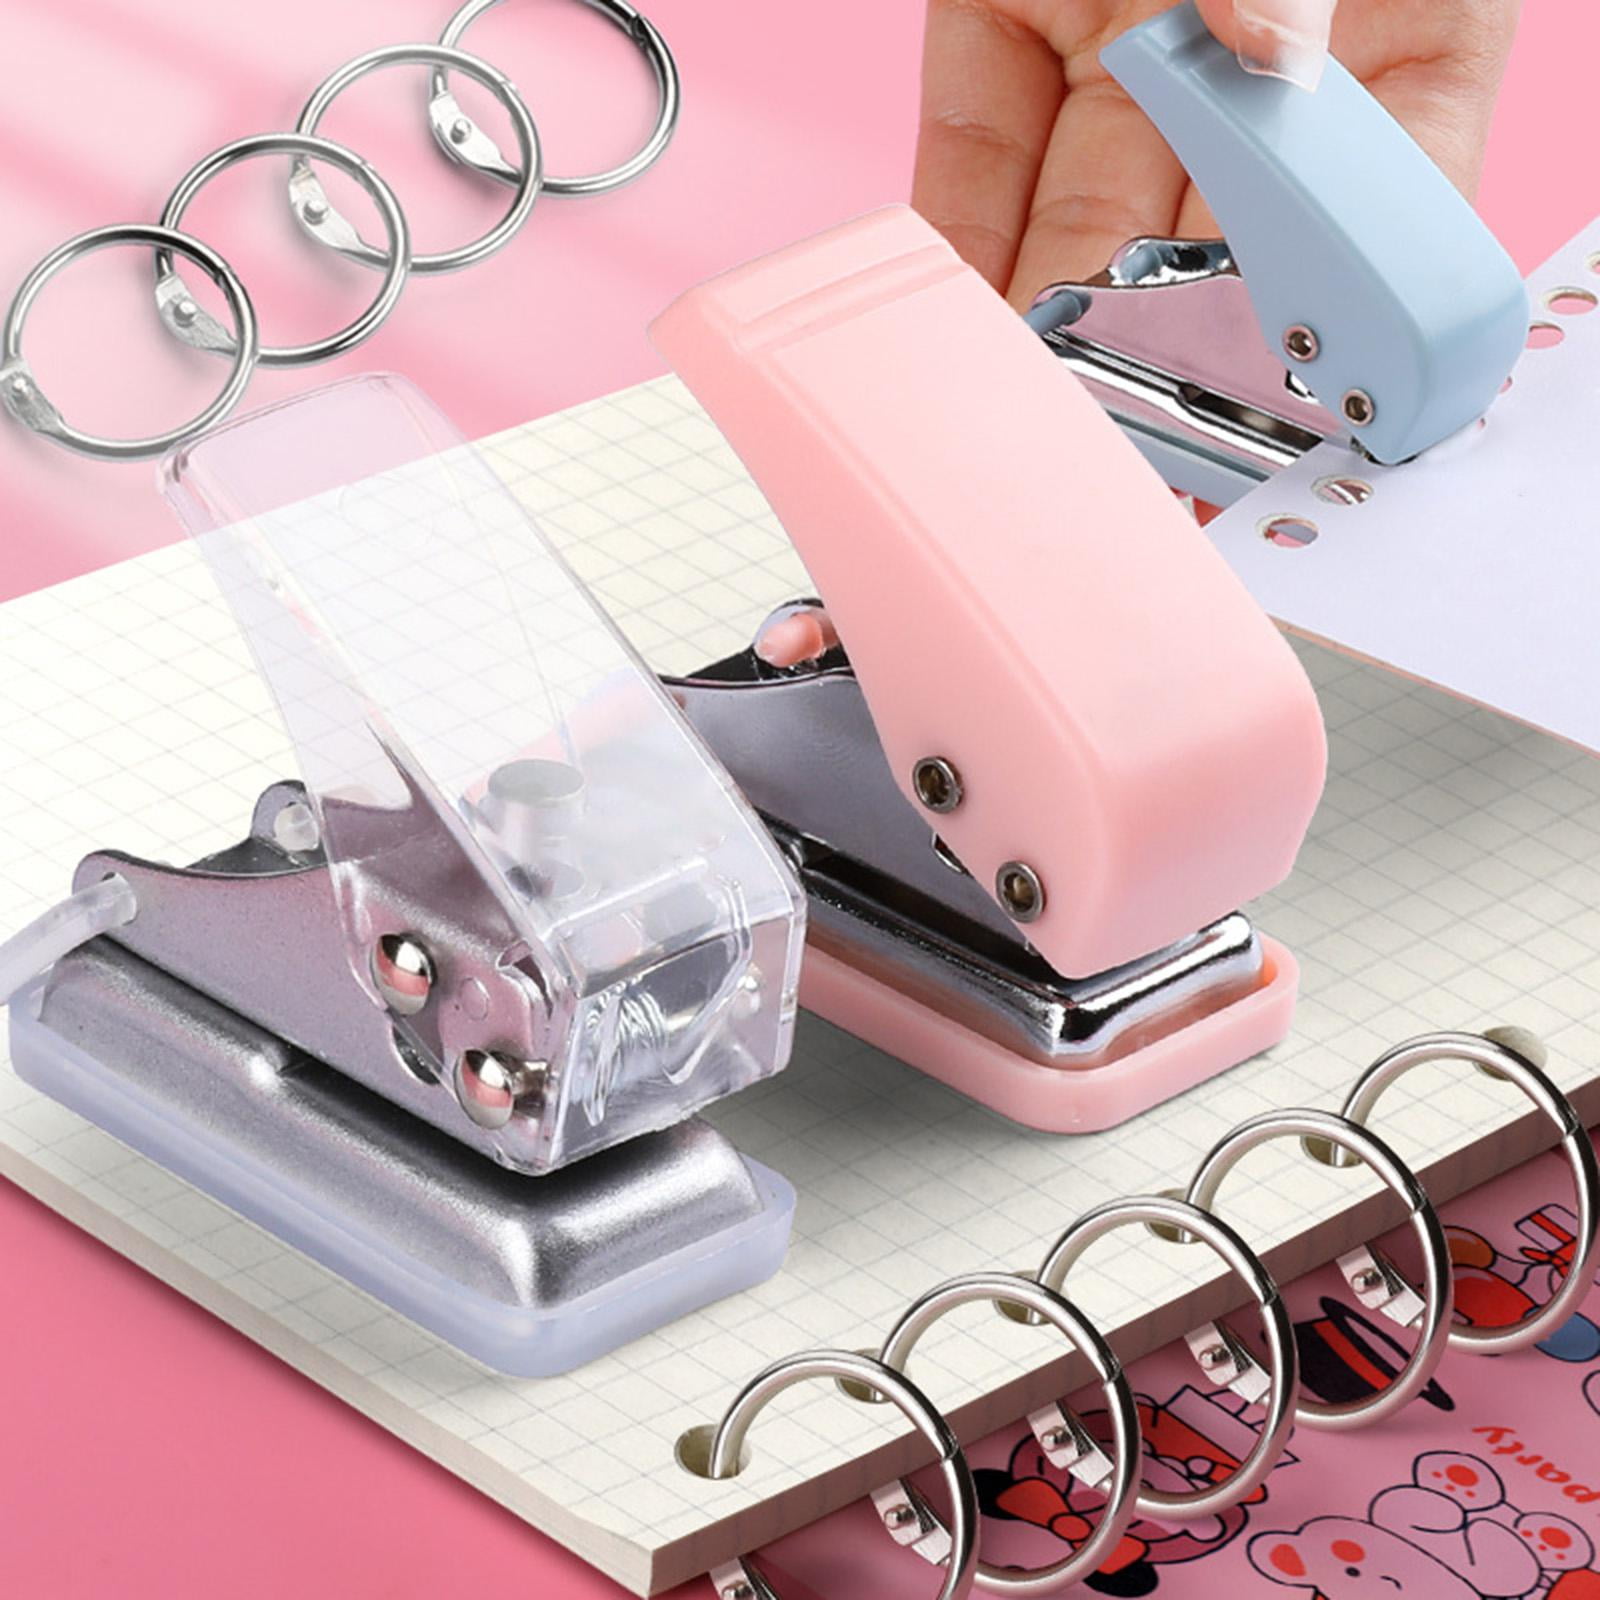 Pink Blue Color Single Ring Mini Hole Puncher 1 Hole Cute Paper Punch  Portable Office School Binding Supplies Stationery - AliExpress